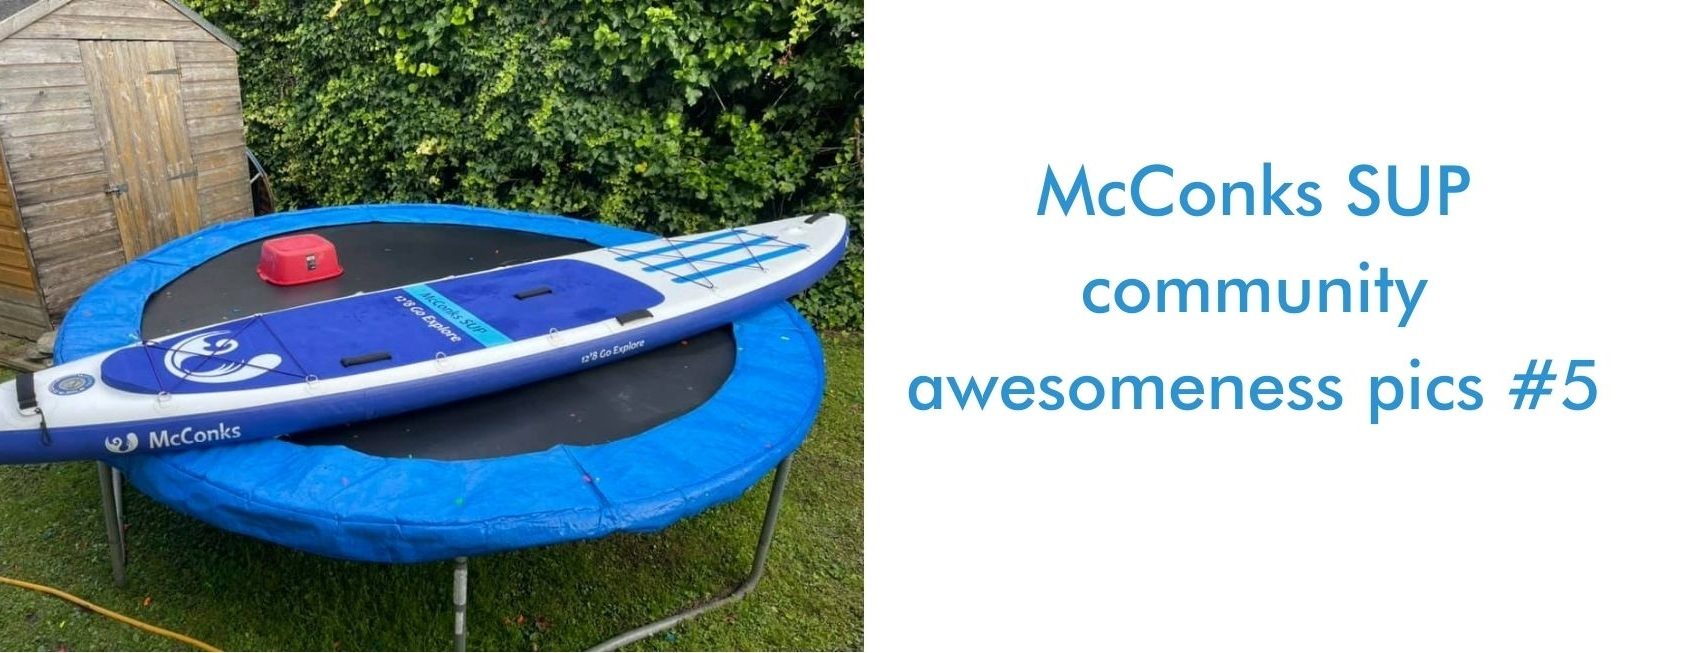 You are currently viewing McConks SUP community awesomeness pics #5